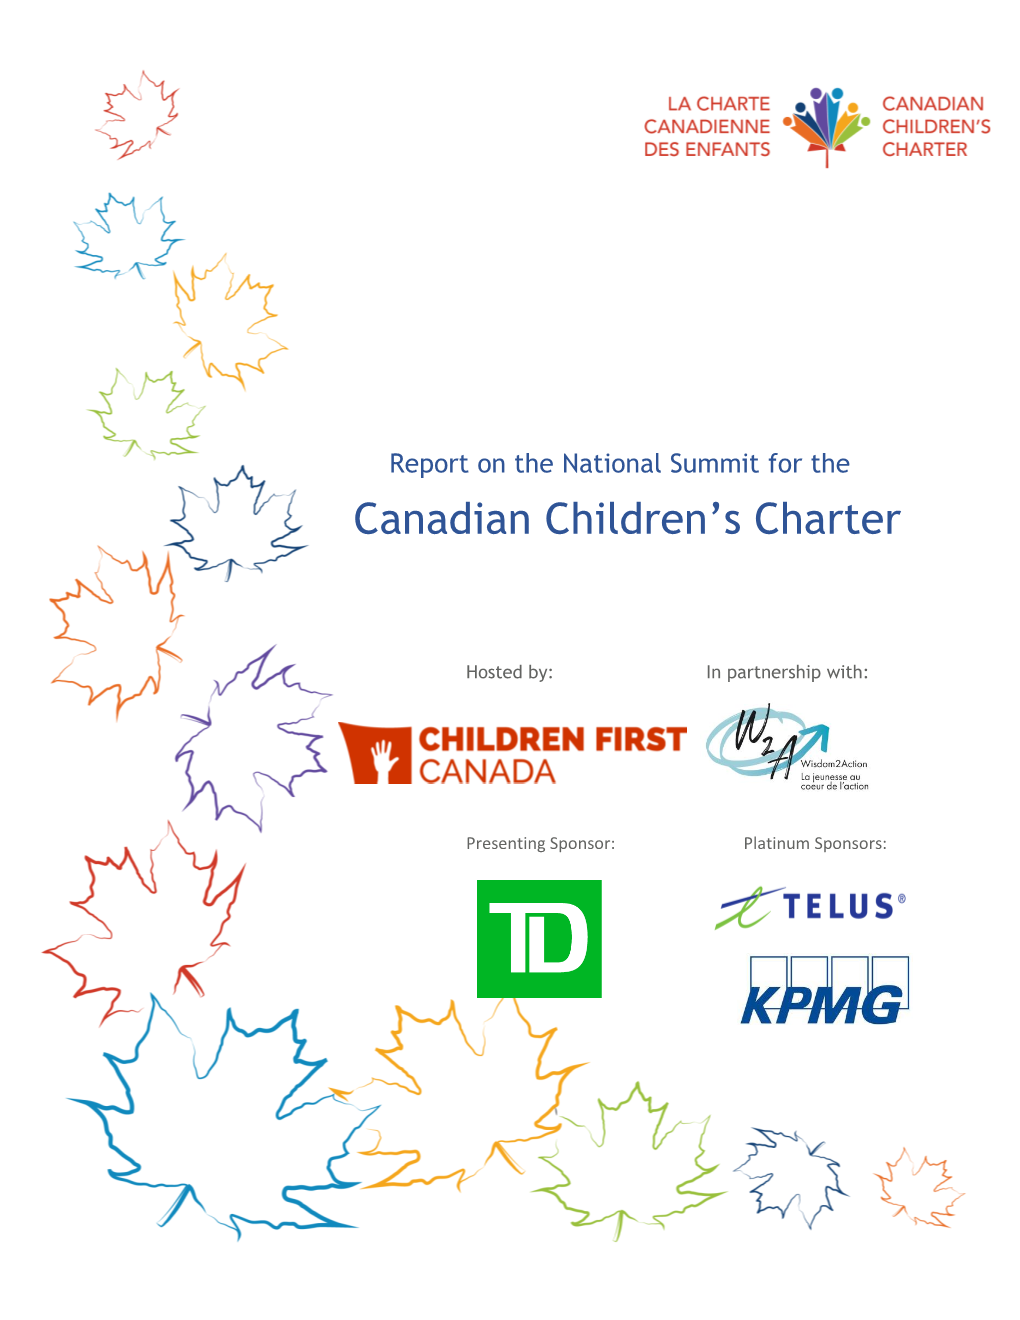 Report on the National Summit for the Canadian Children's Charter